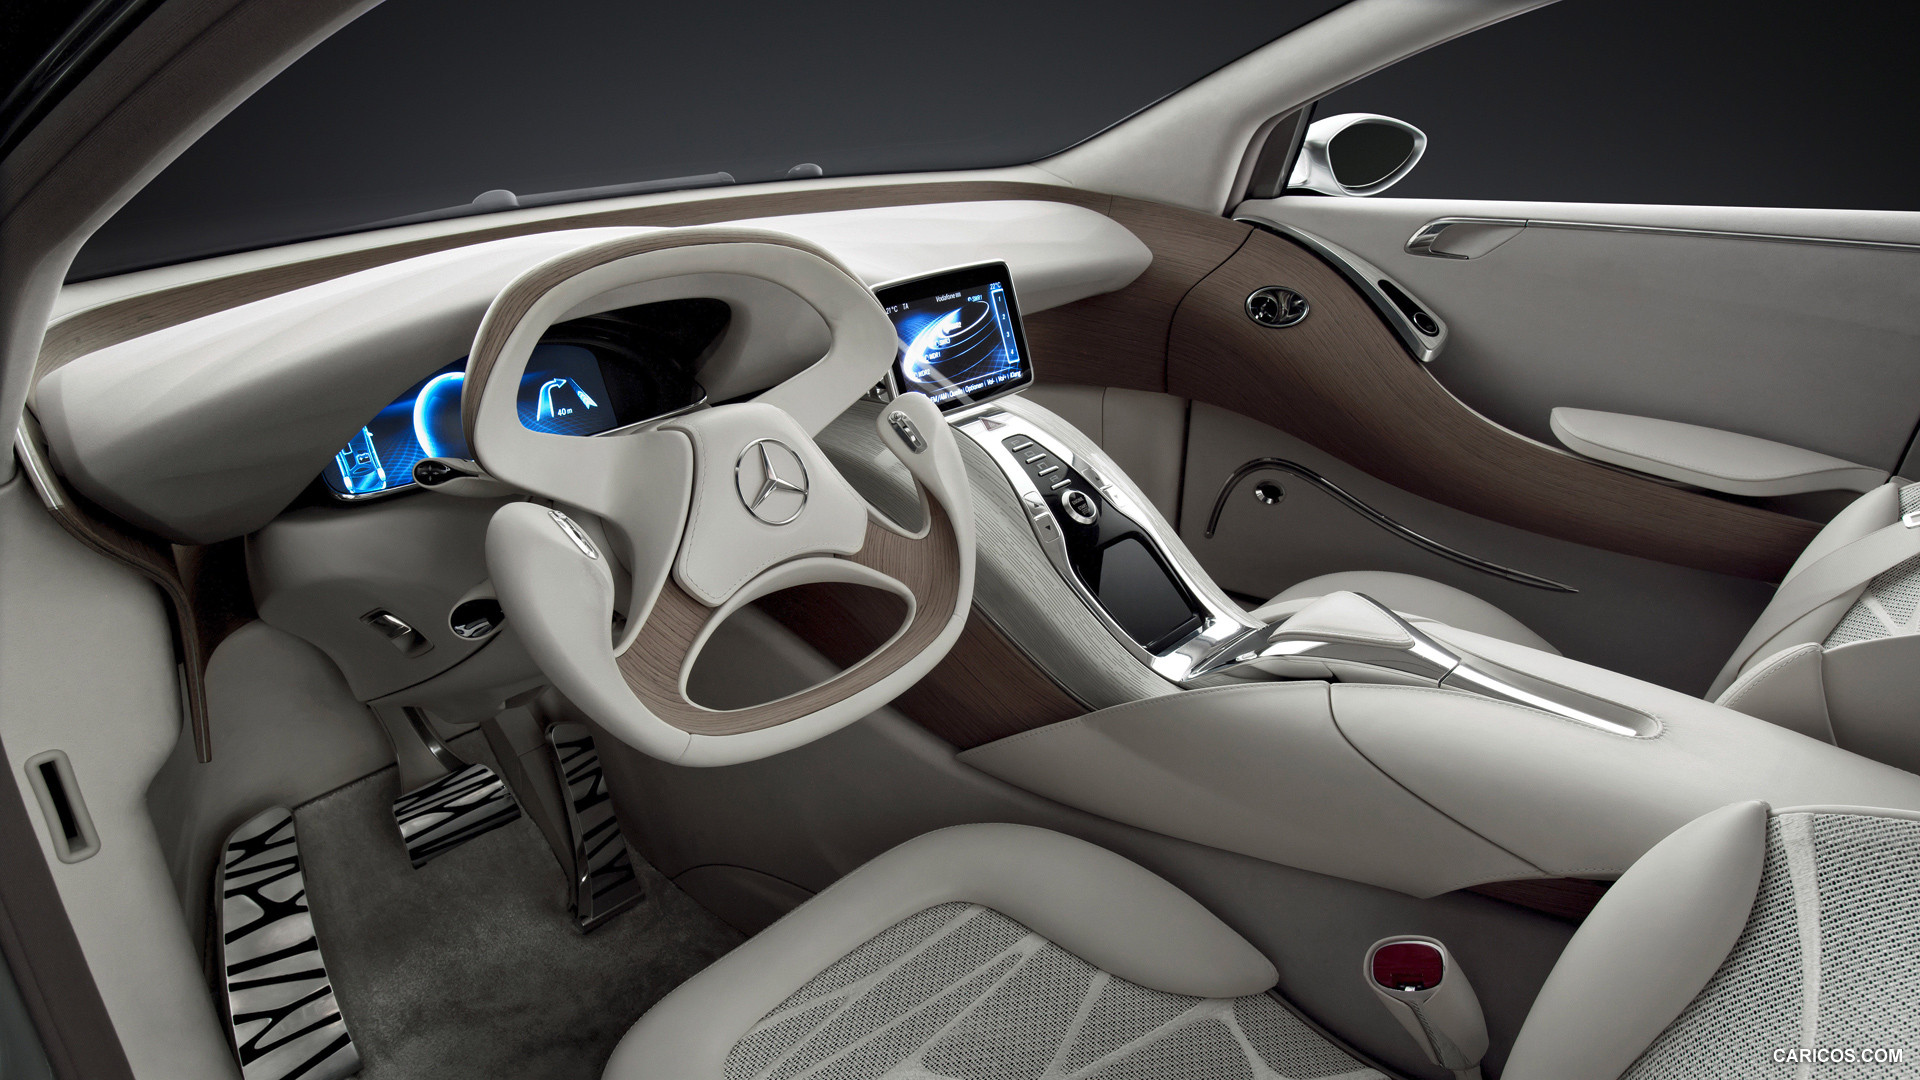 Mercedes-Benz F800 Style Concept (2010)  - Interior, Front Seats, #41 of 120